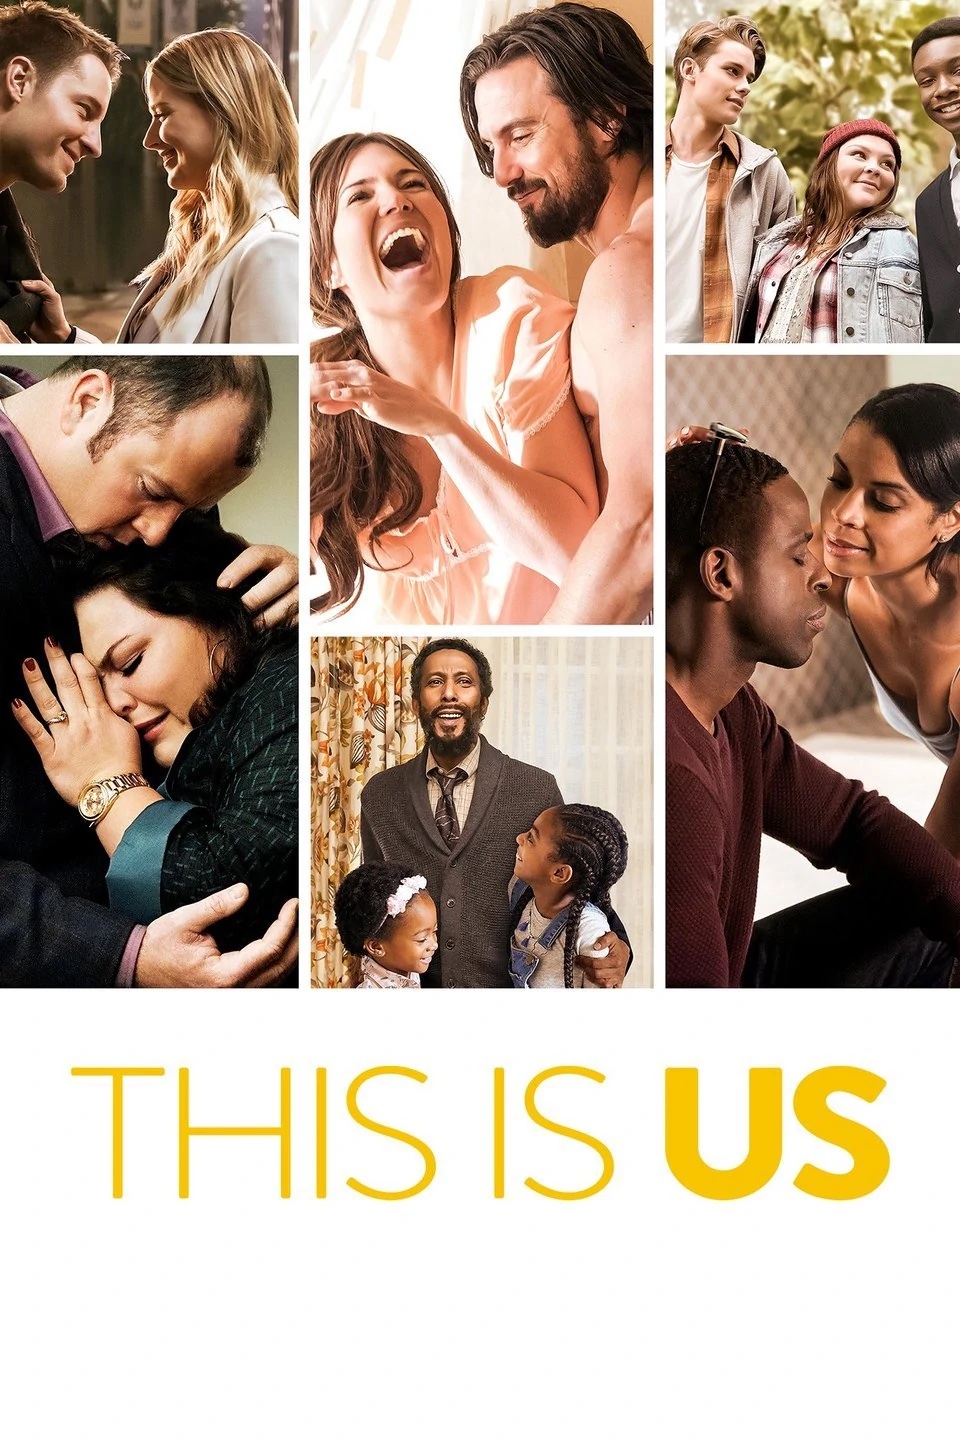 Why Does "This Is Us" Kick My Ass So Easily?